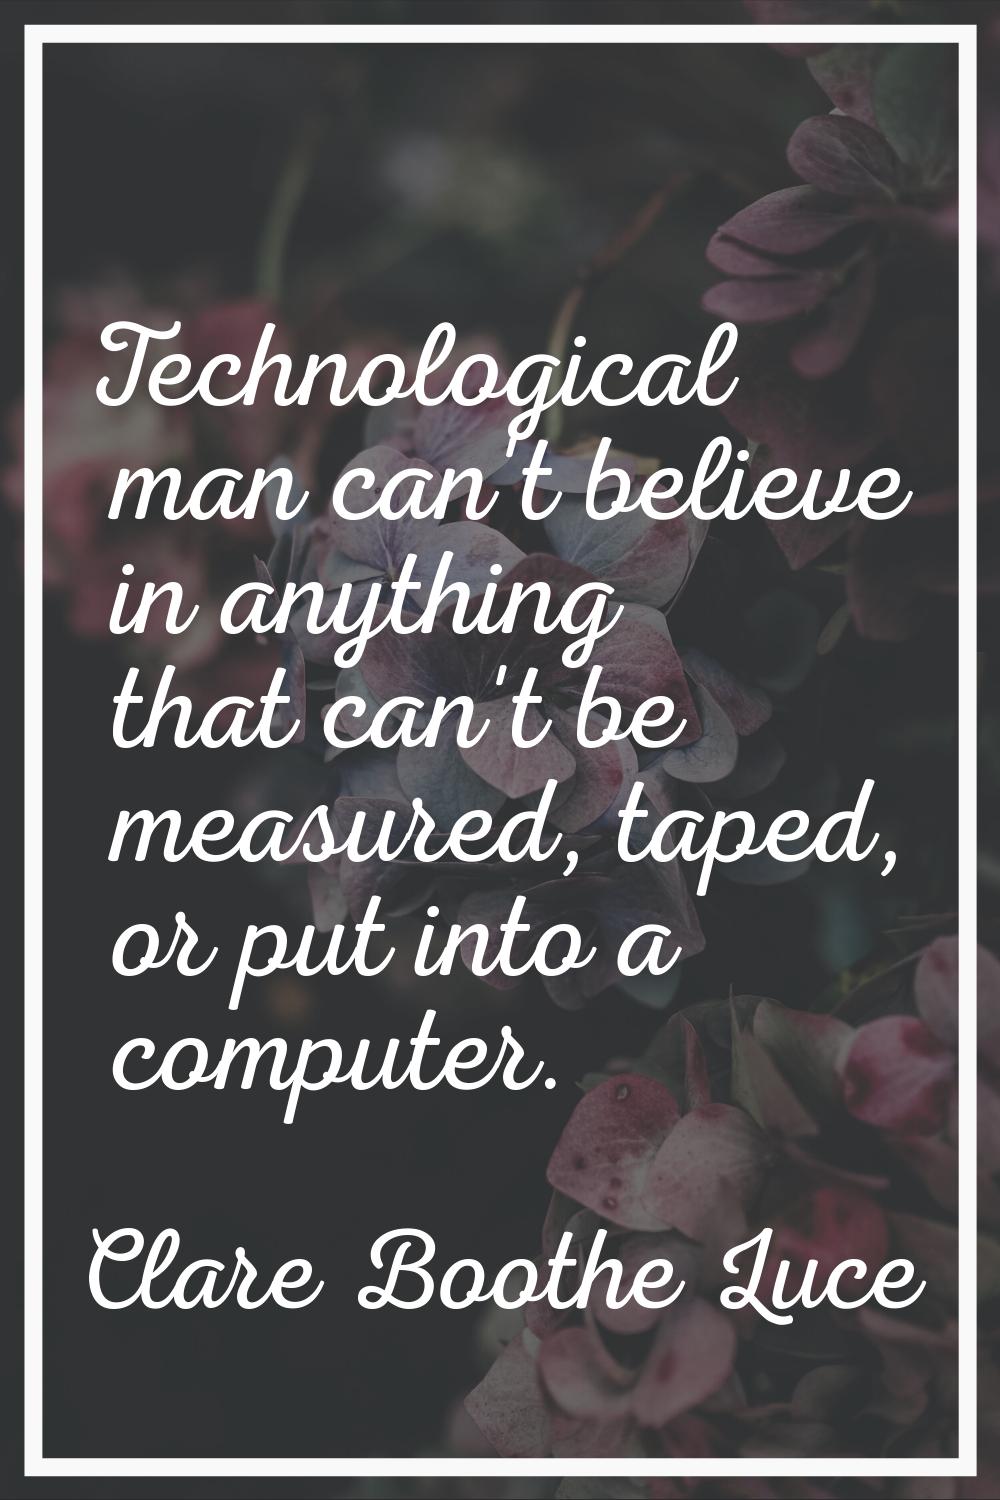 Technological man can't believe in anything that can't be measured, taped, or put into a computer.